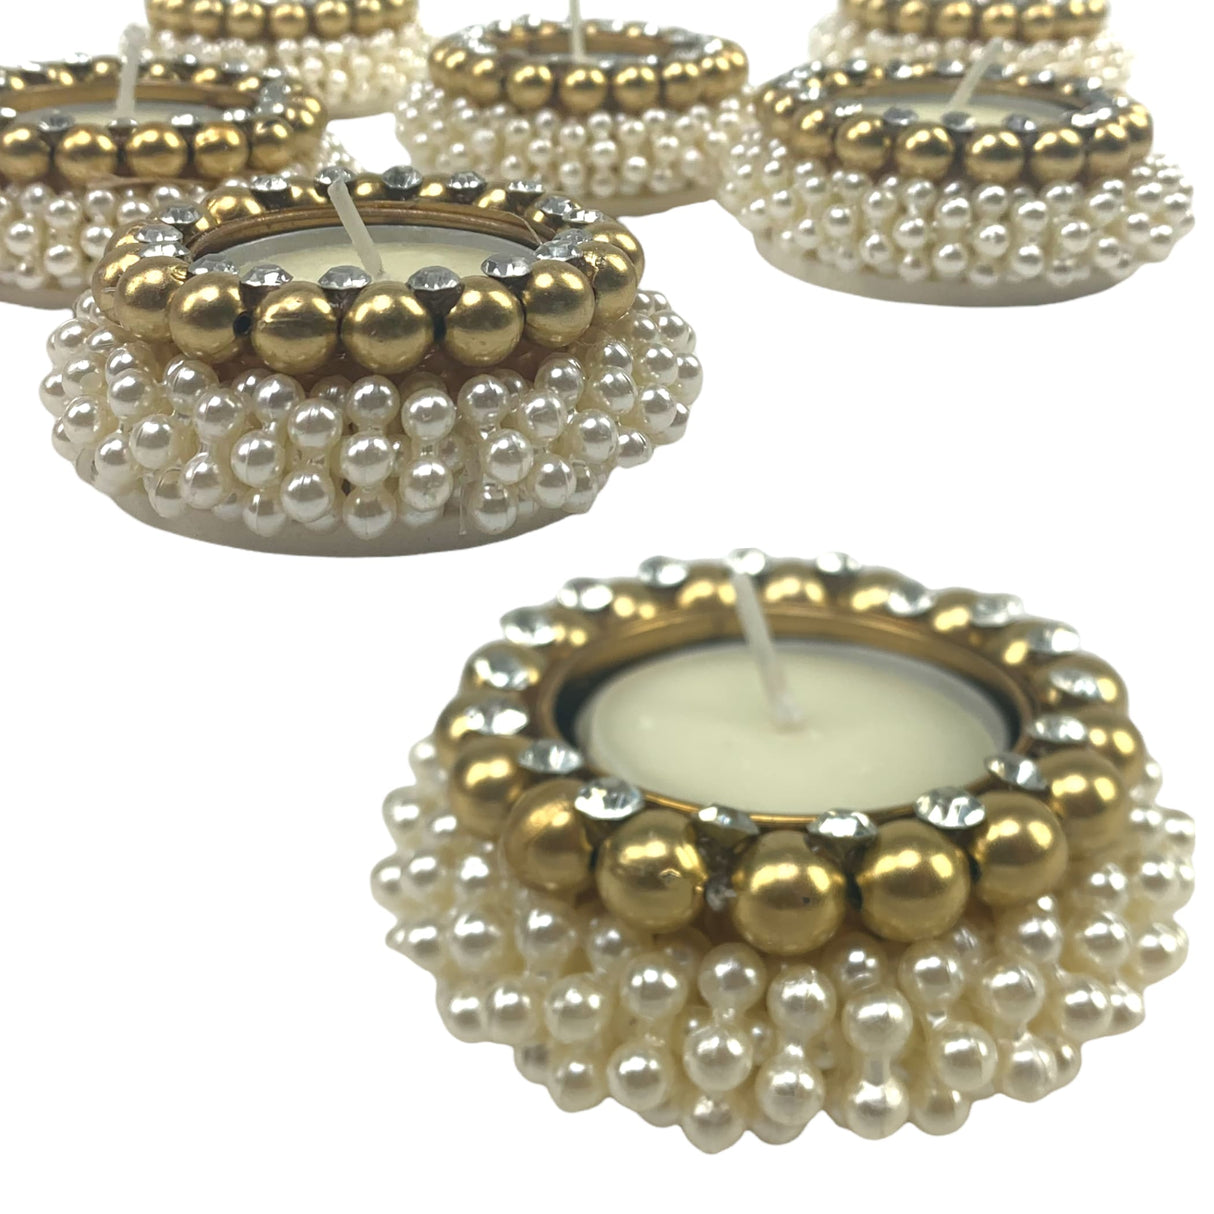 4 pieces pearl tealight candle holders round votives diya